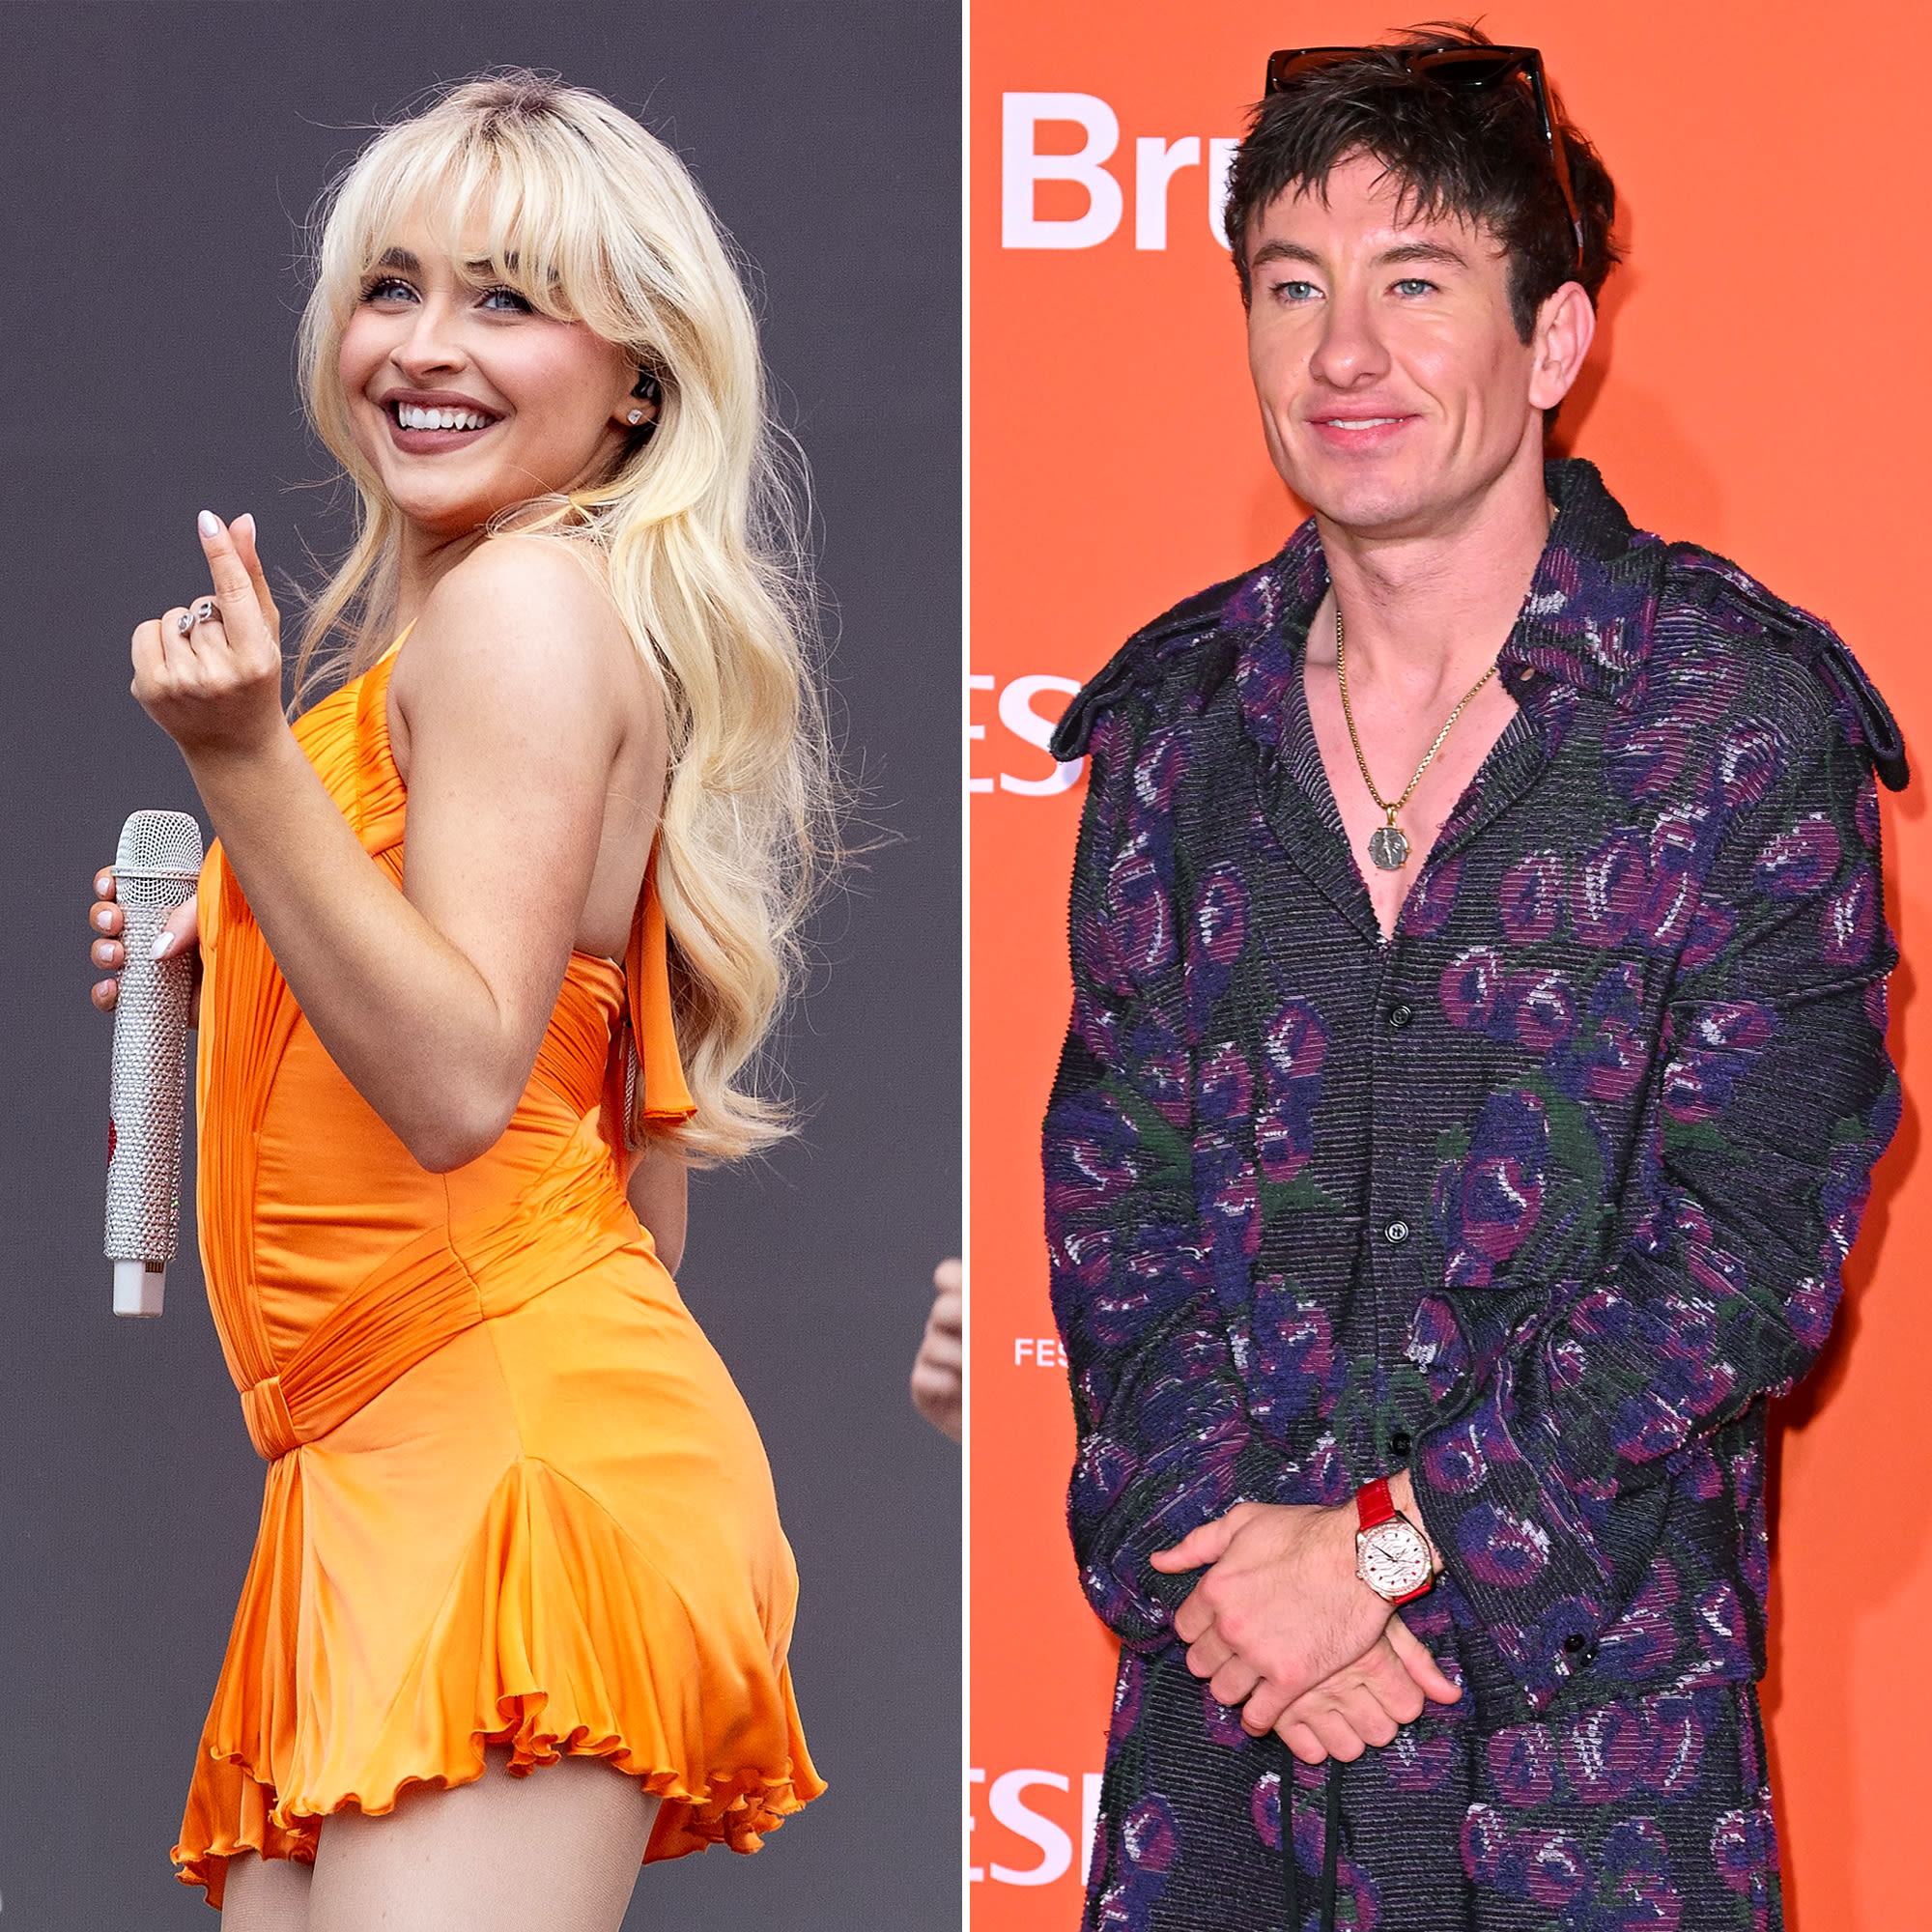 Sabrina Carpenter Dons Orange Creamsicle Dress to Perform in Front of Boyfriend Barry Keoghan